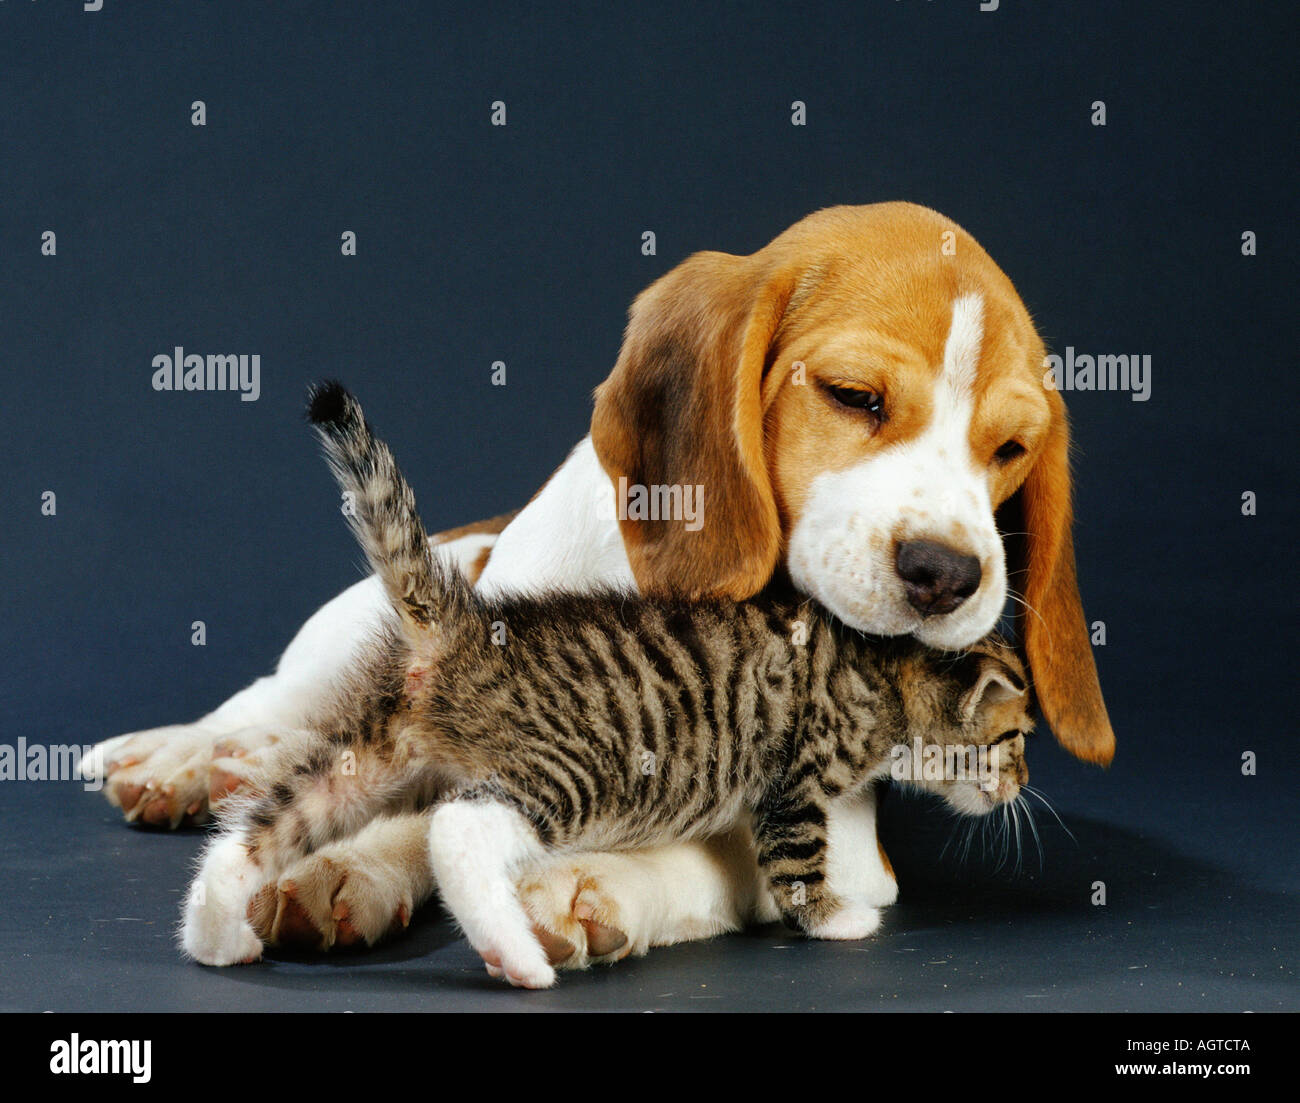 beagles and cats